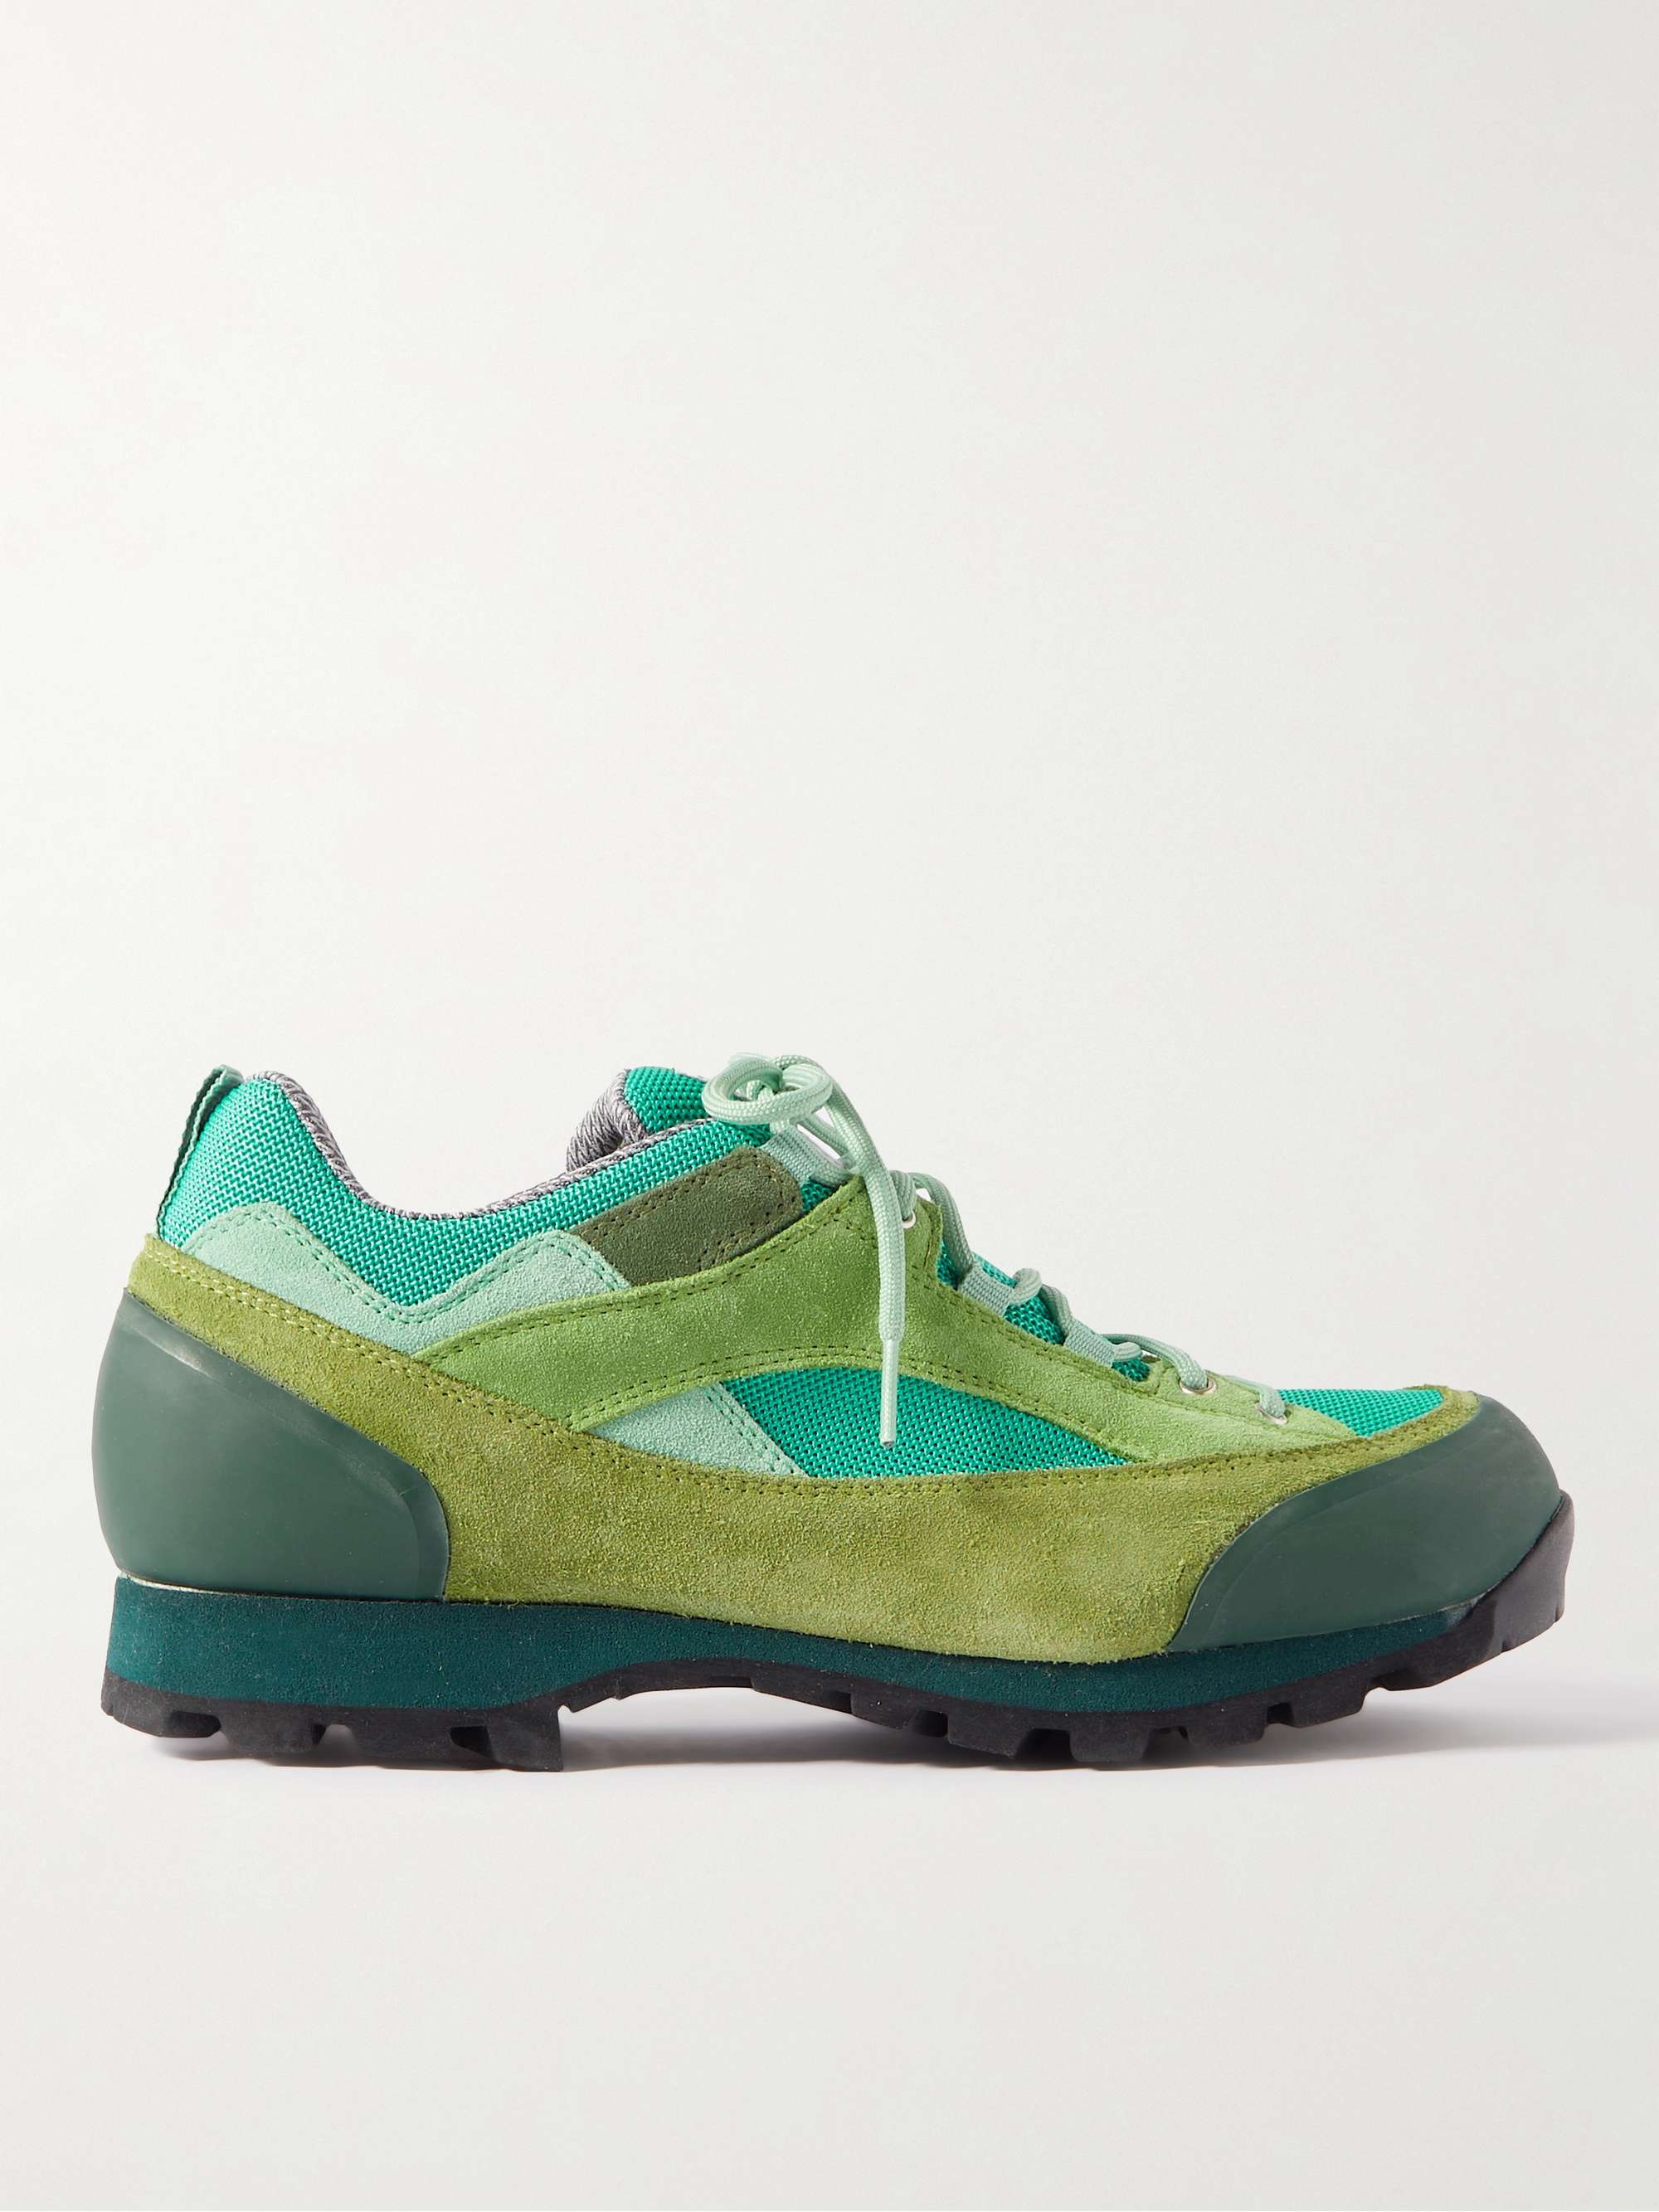 Green Grappa Rubber-Trimmed Suede and Mesh Sneakers | DIEMME | MR PORTER